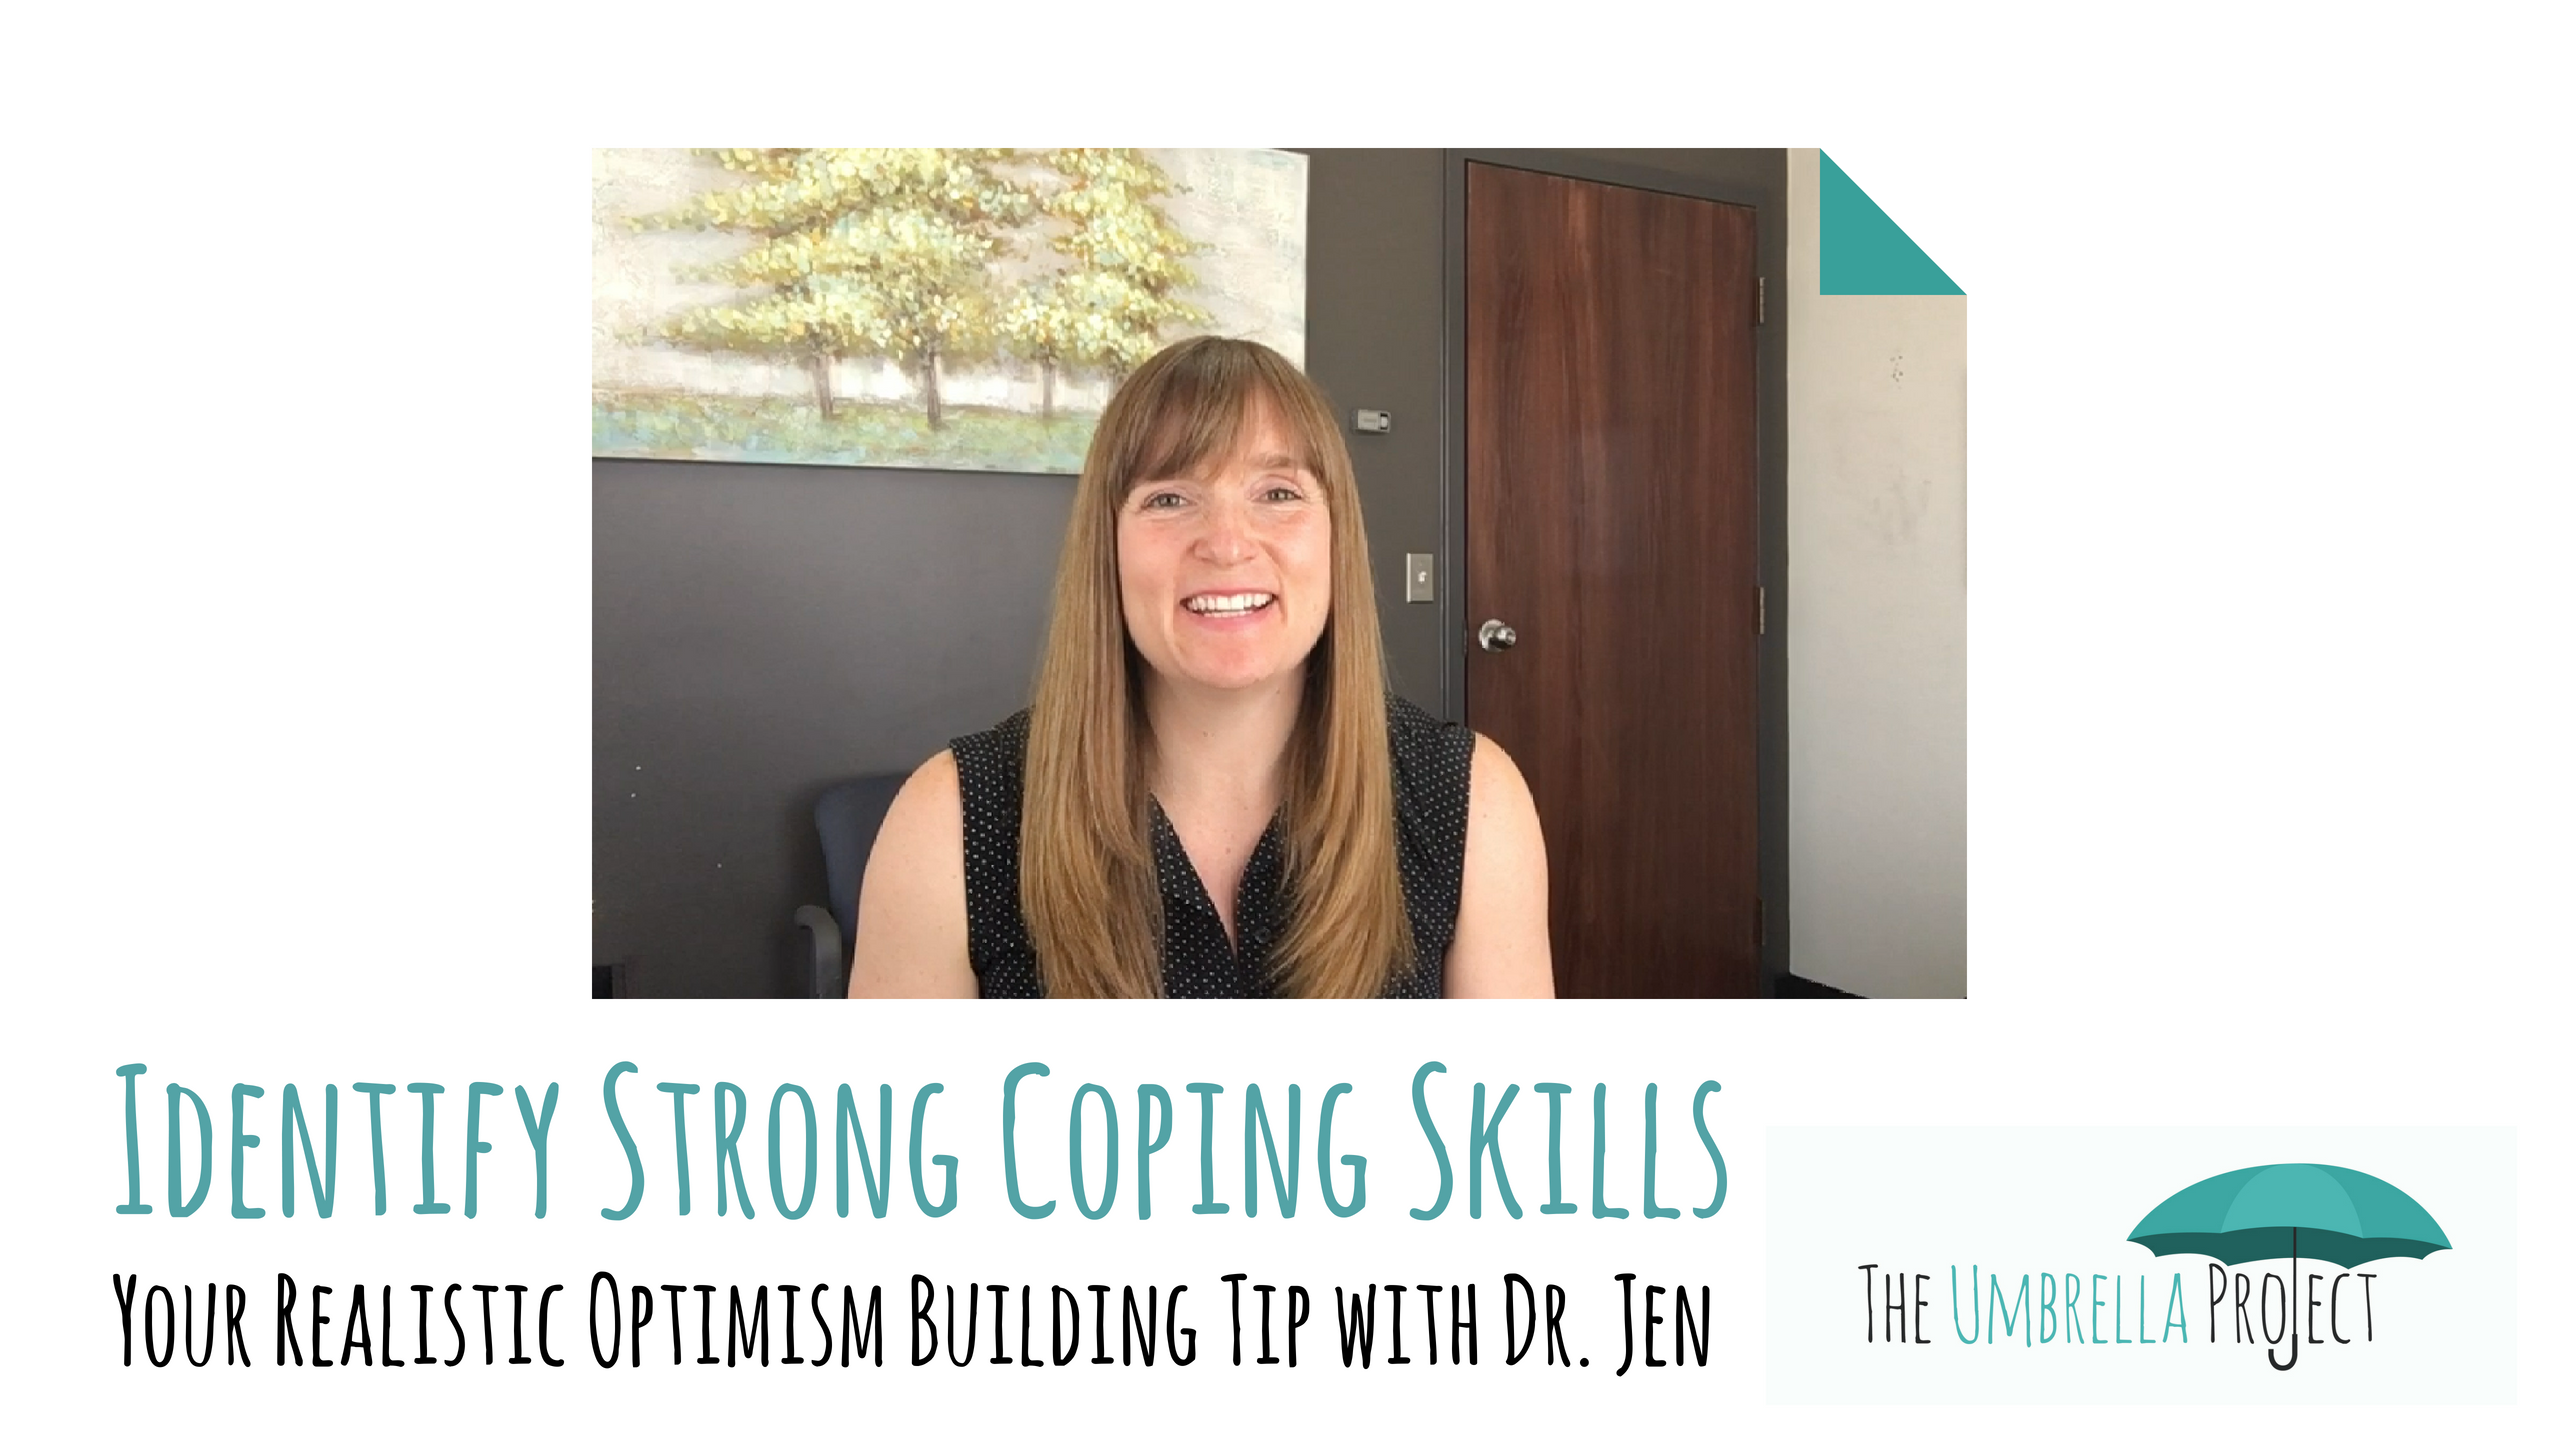 Identify Strong Coping Skills: Your Realistic Optimism Building Tip with Dr. Jen